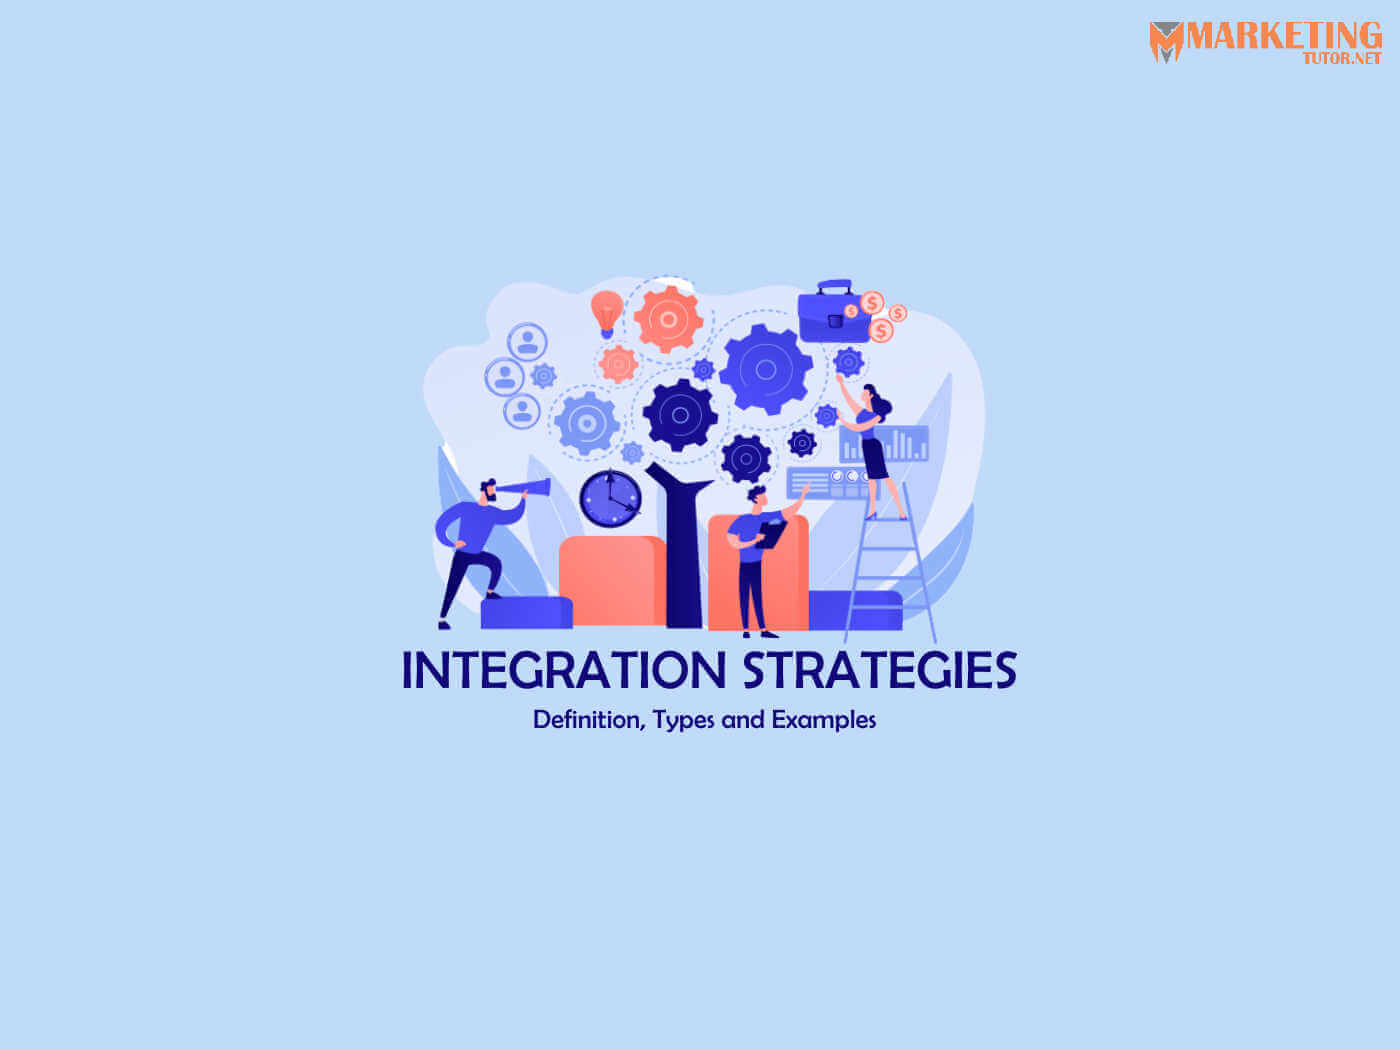 Integration Strategy Definition Types Pros Cons Examples - kulturaupice